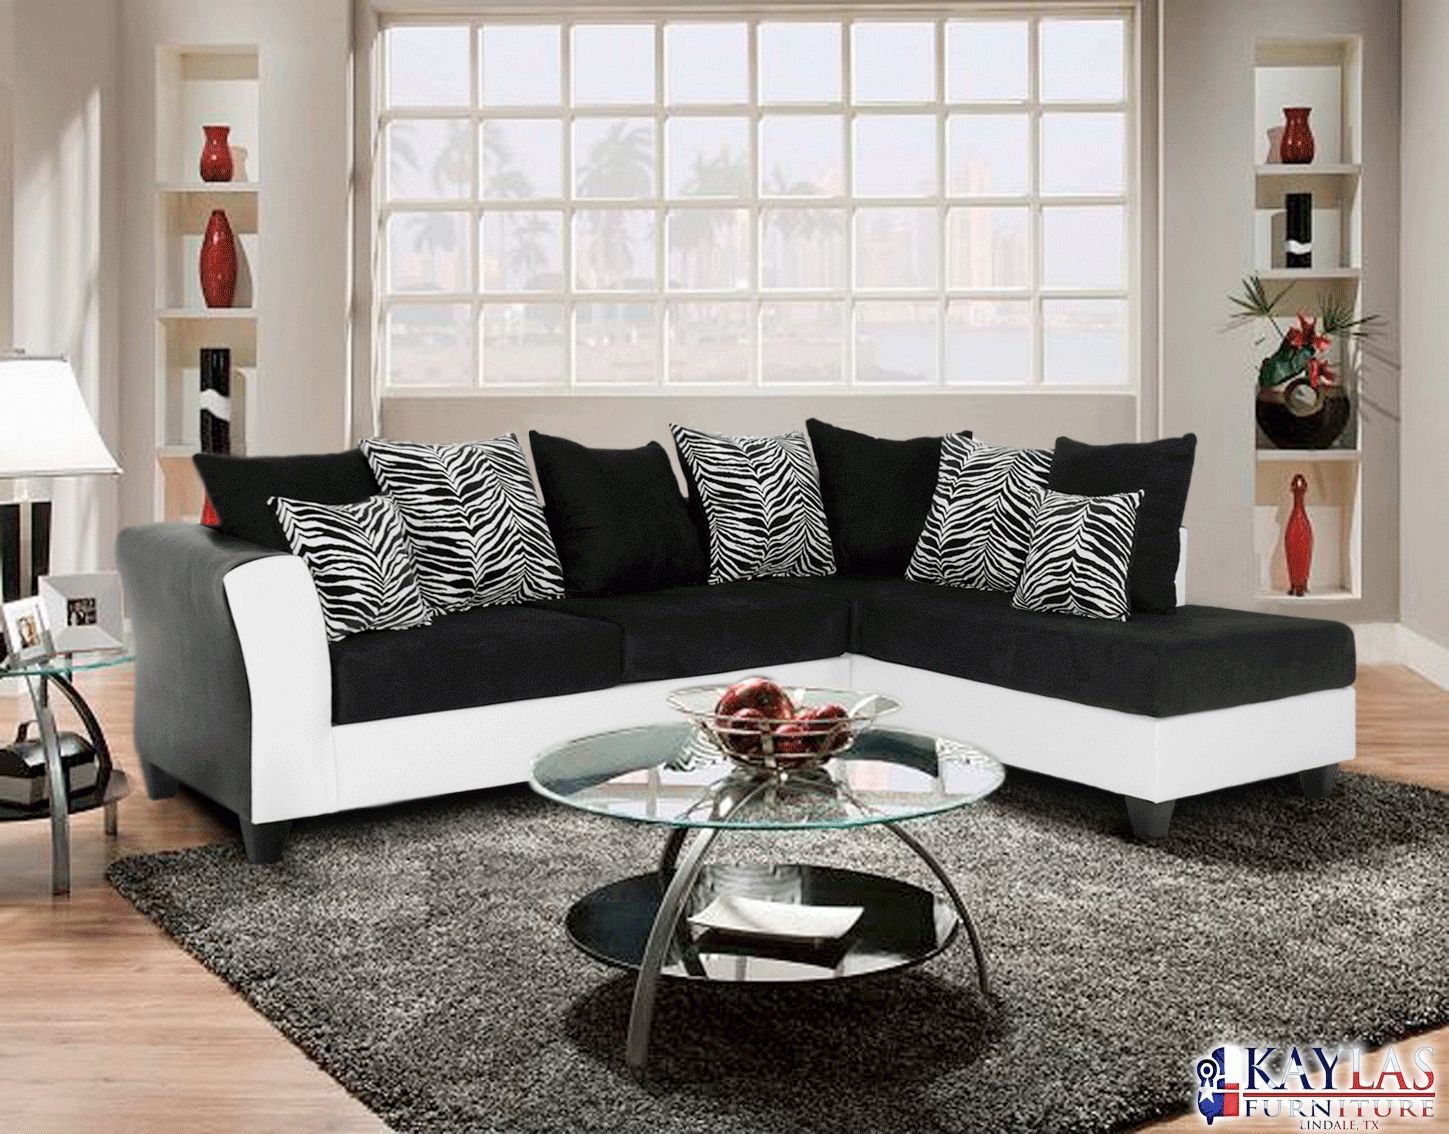 Kaylasfurniture Throughout Black And White Sectional (View 7 of 15)